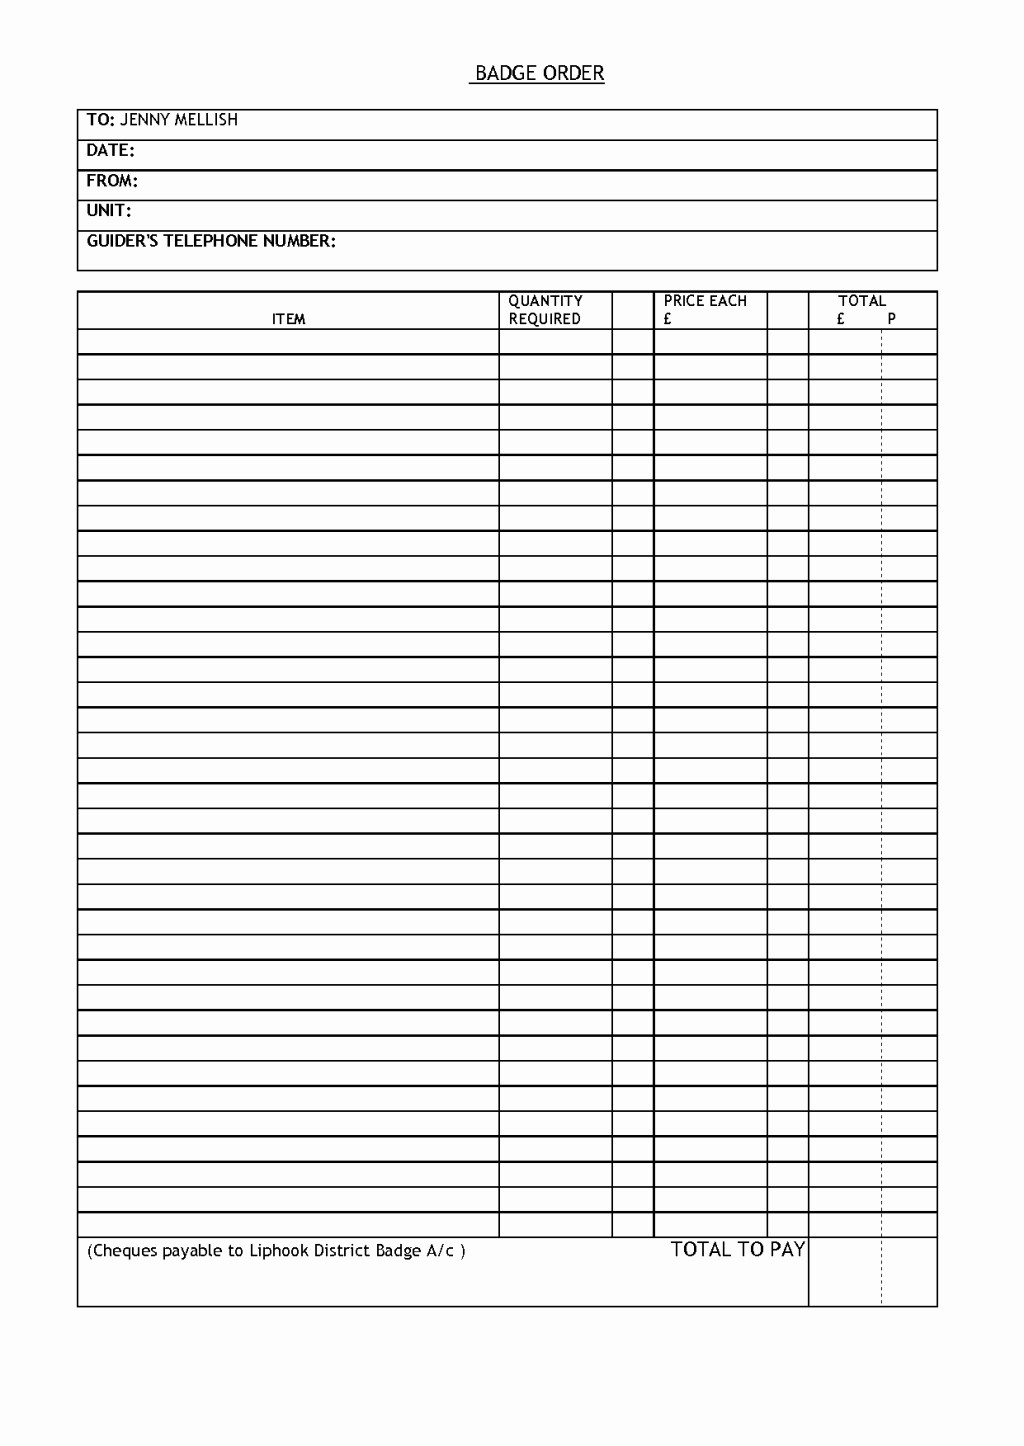 T Shirt form Template Awesome Blank T Shirt order form – Emmamcintyrephotography